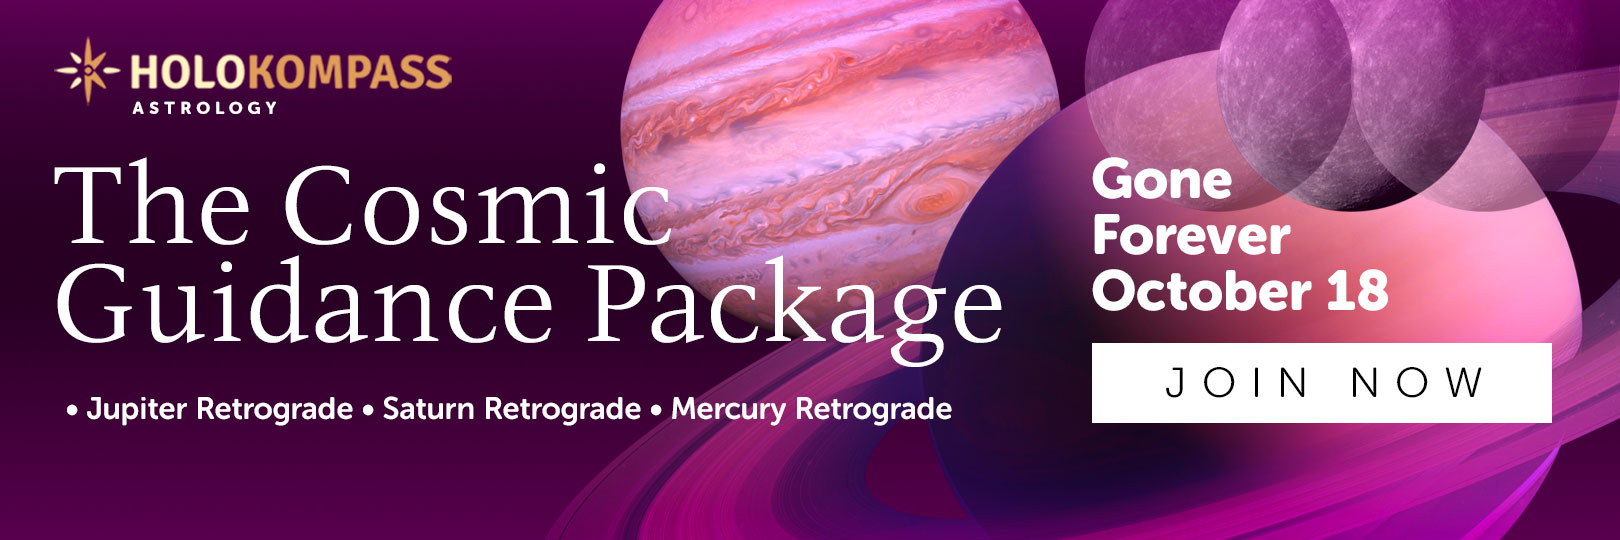 The Cosmic Guidance Package - Gone Forever Oct. 18! Join Now